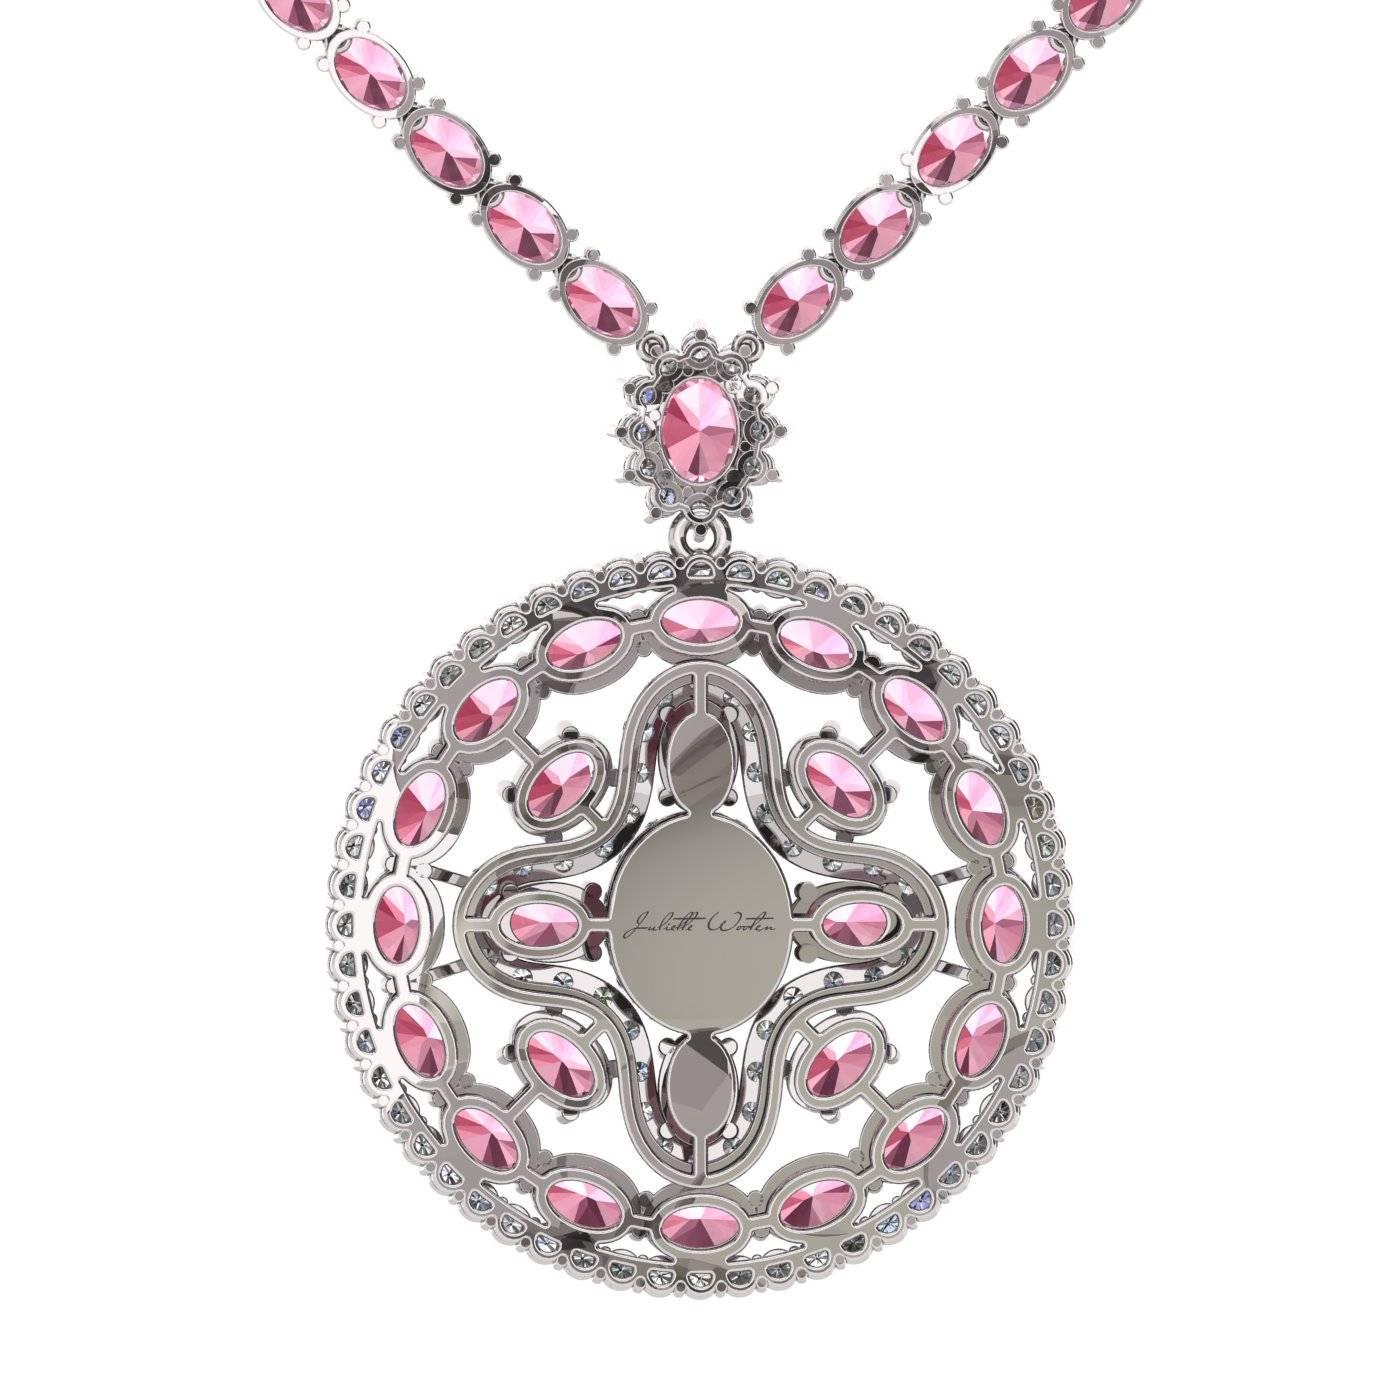 INTRODUCING NEW COLLECTION LE CERCLE PARFAIT

Beautiful and precious! Alluring pink sapphire is teaching that true strength lies in the power of vulnerability. It is symbolizing love, intuition and clarity. Discover the natural beauty of this